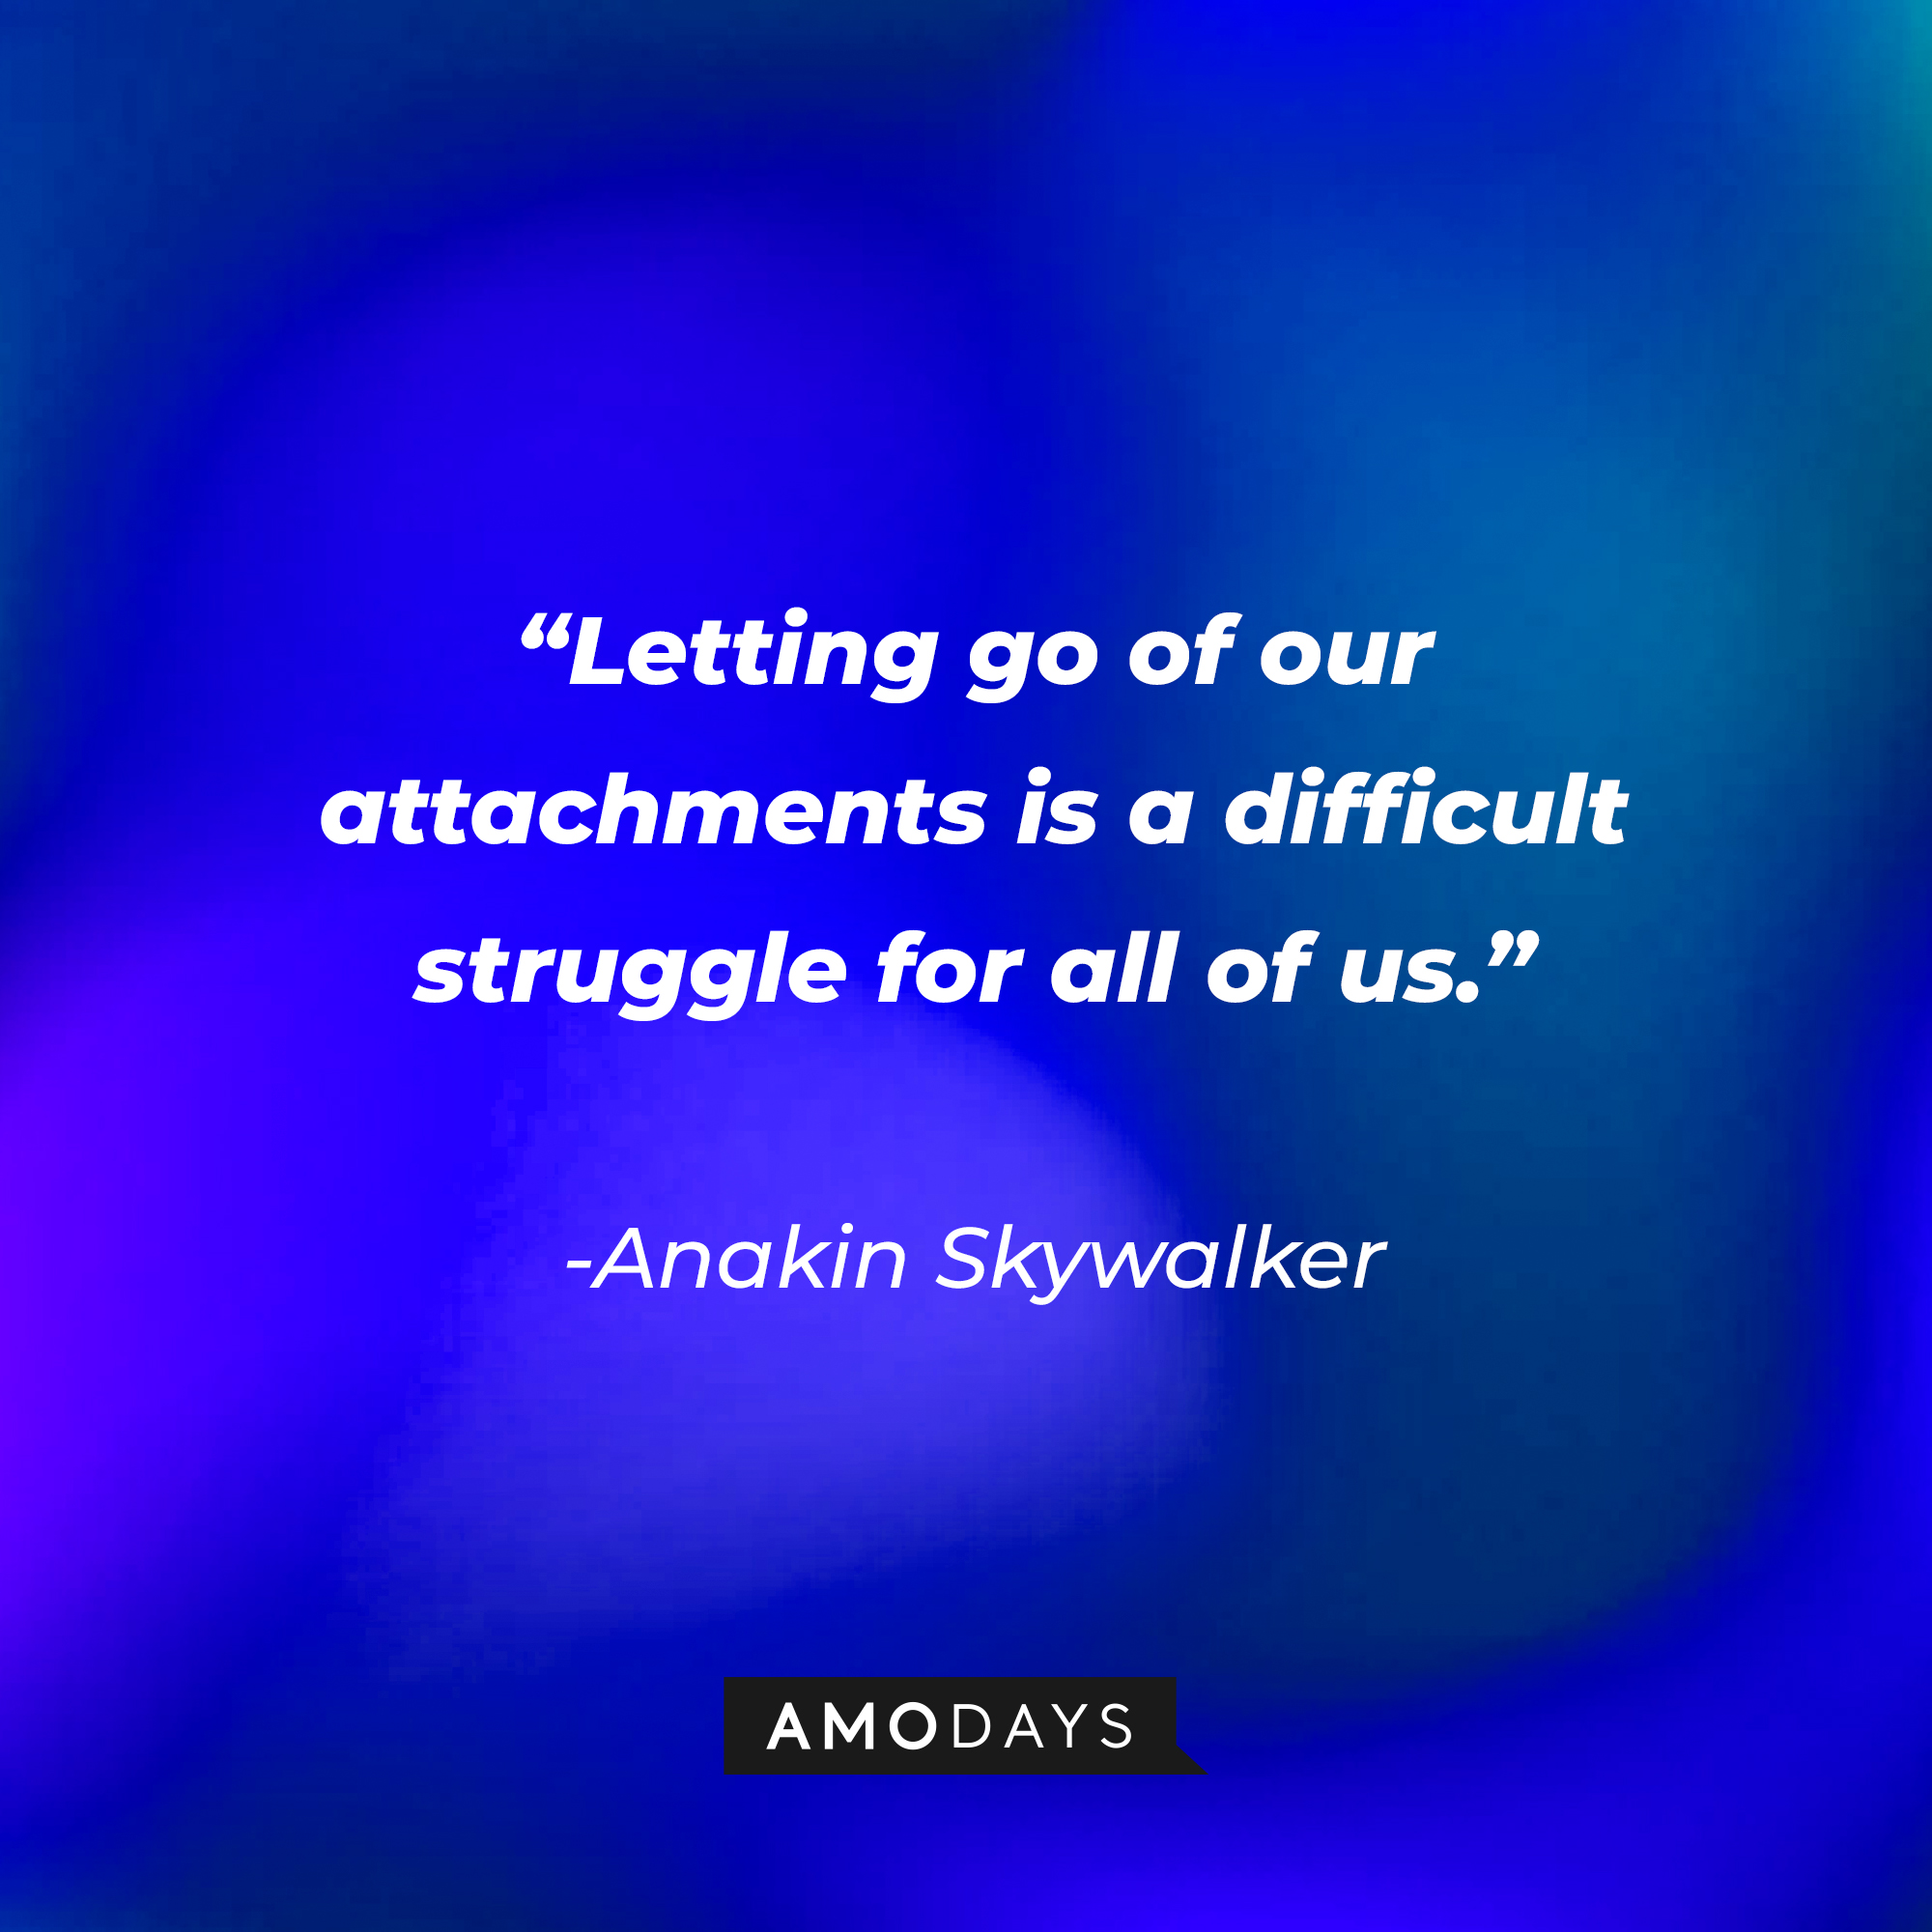 Anakin Skywalker’s quote: "Letting go of our attachments is a difficult struggle for all of us.” | Source: AmoDays